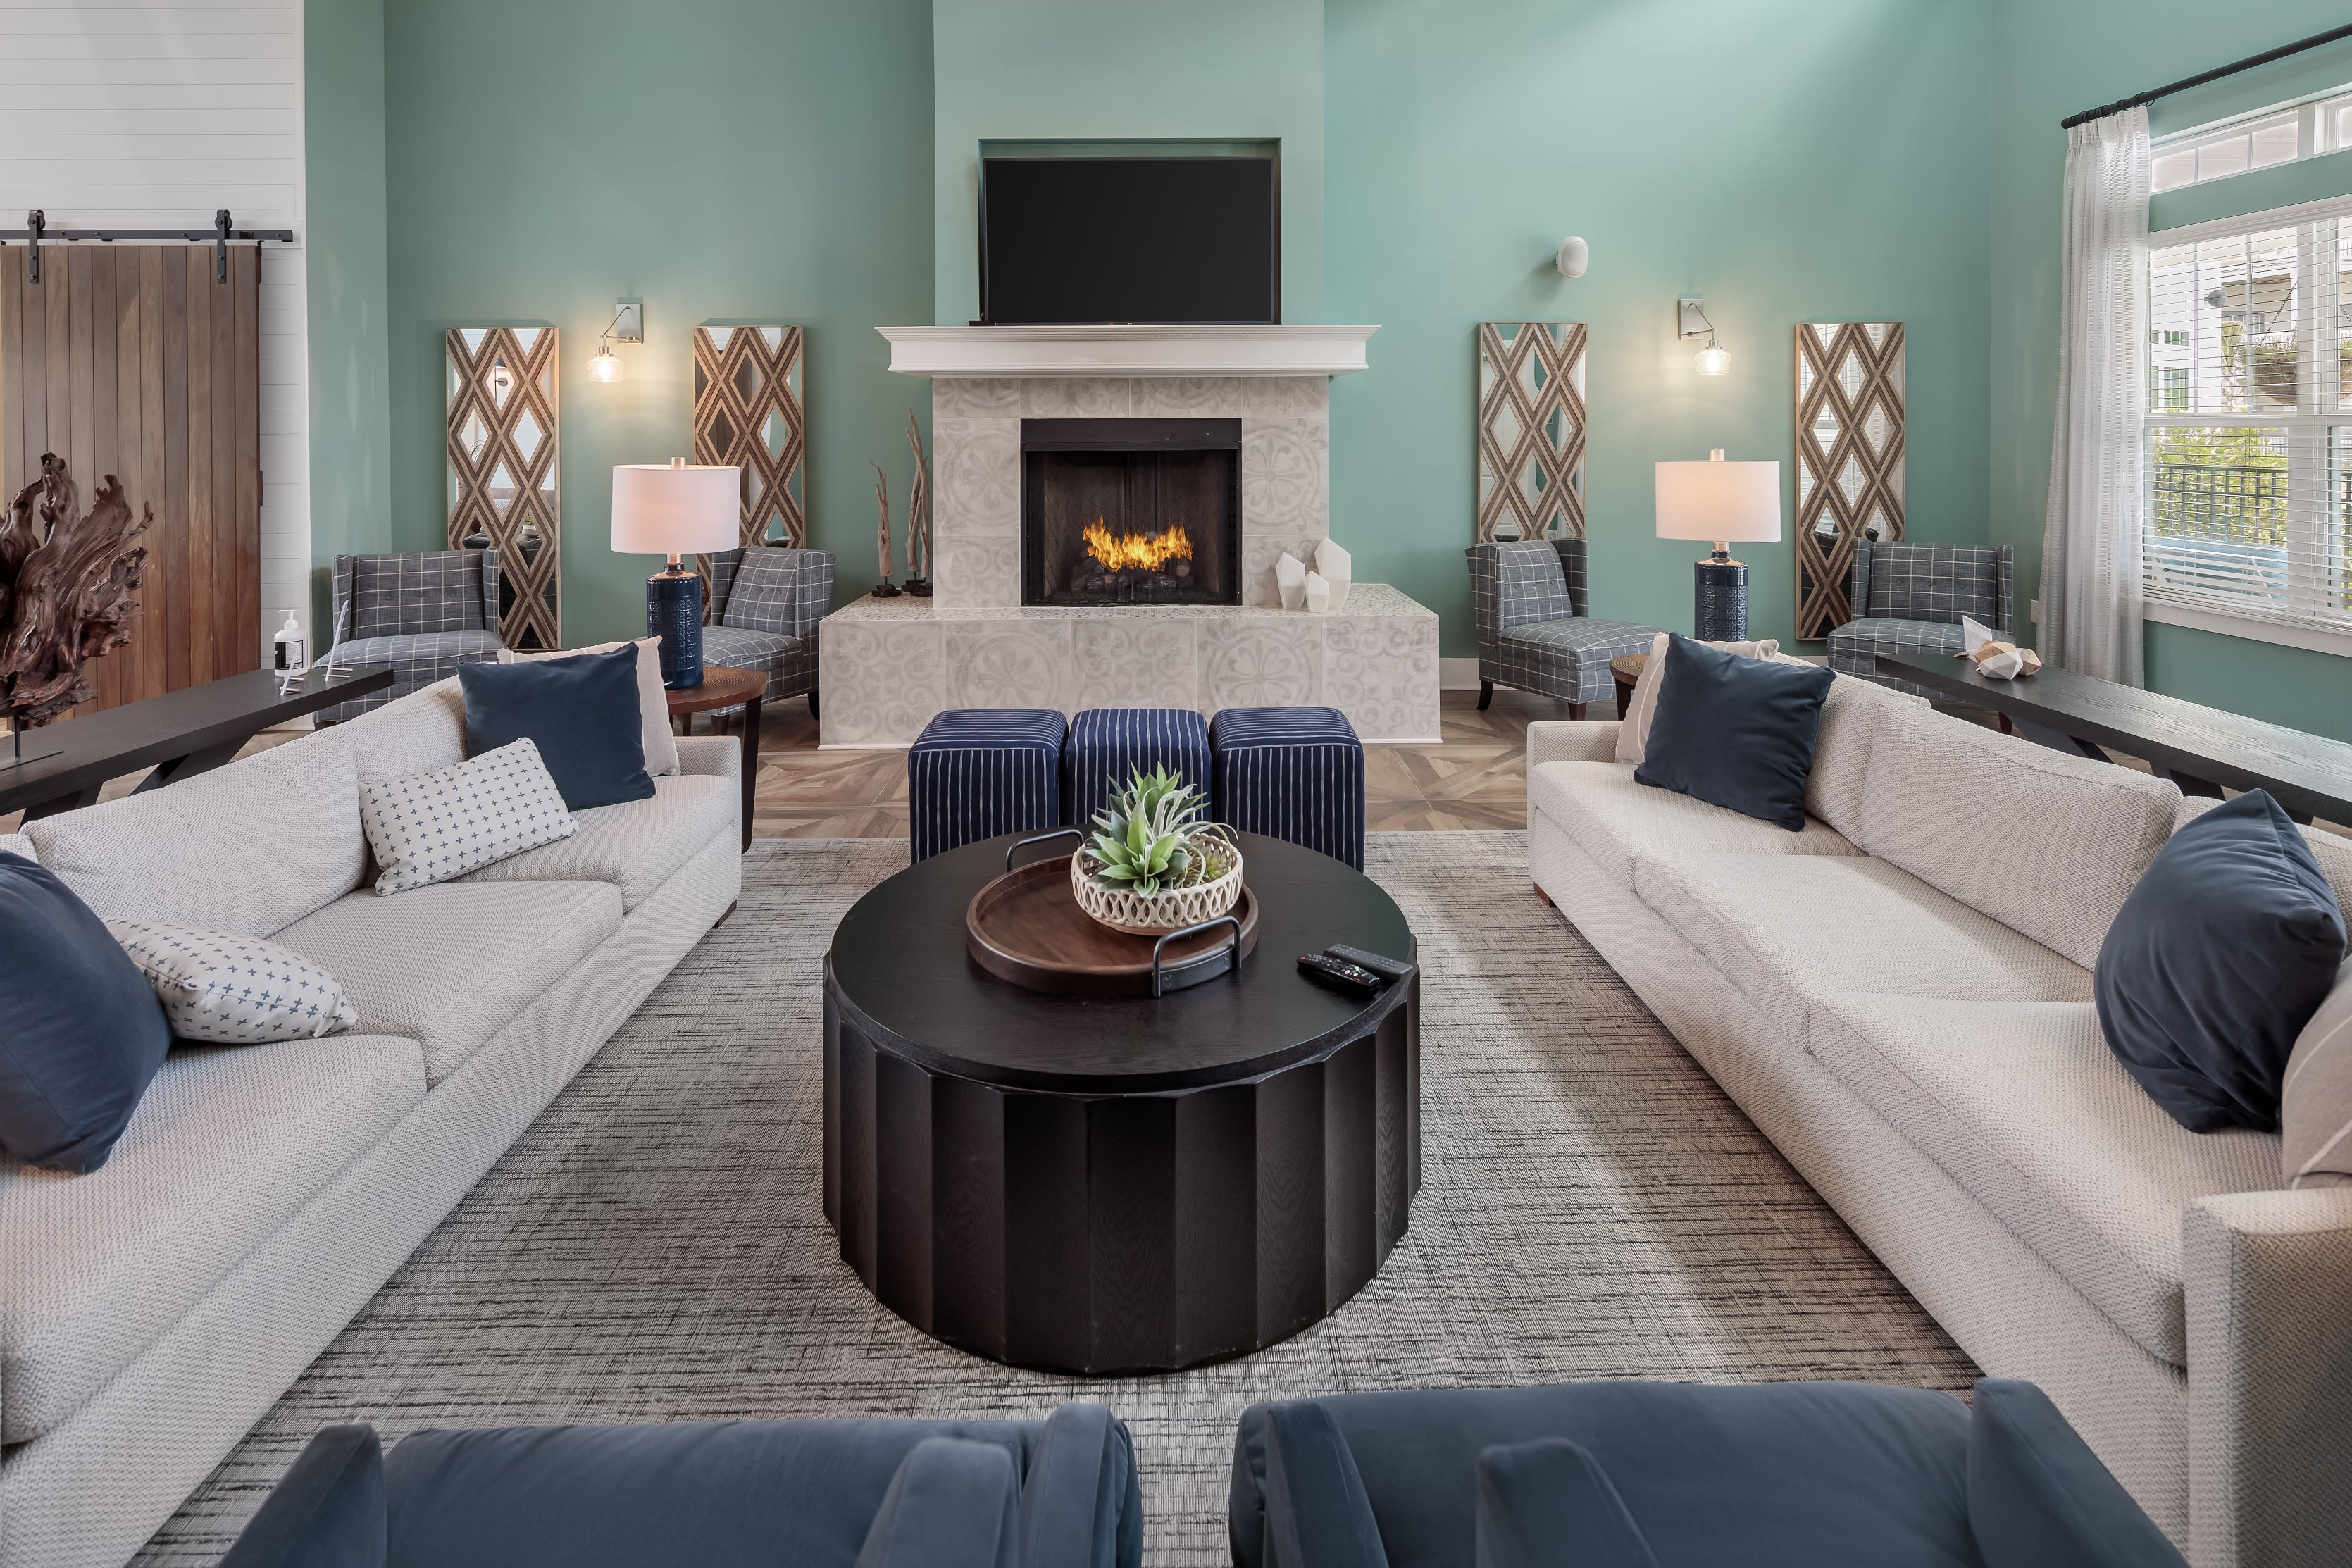 Are for residents to lounge at The Mason in Ladson, South Carolina